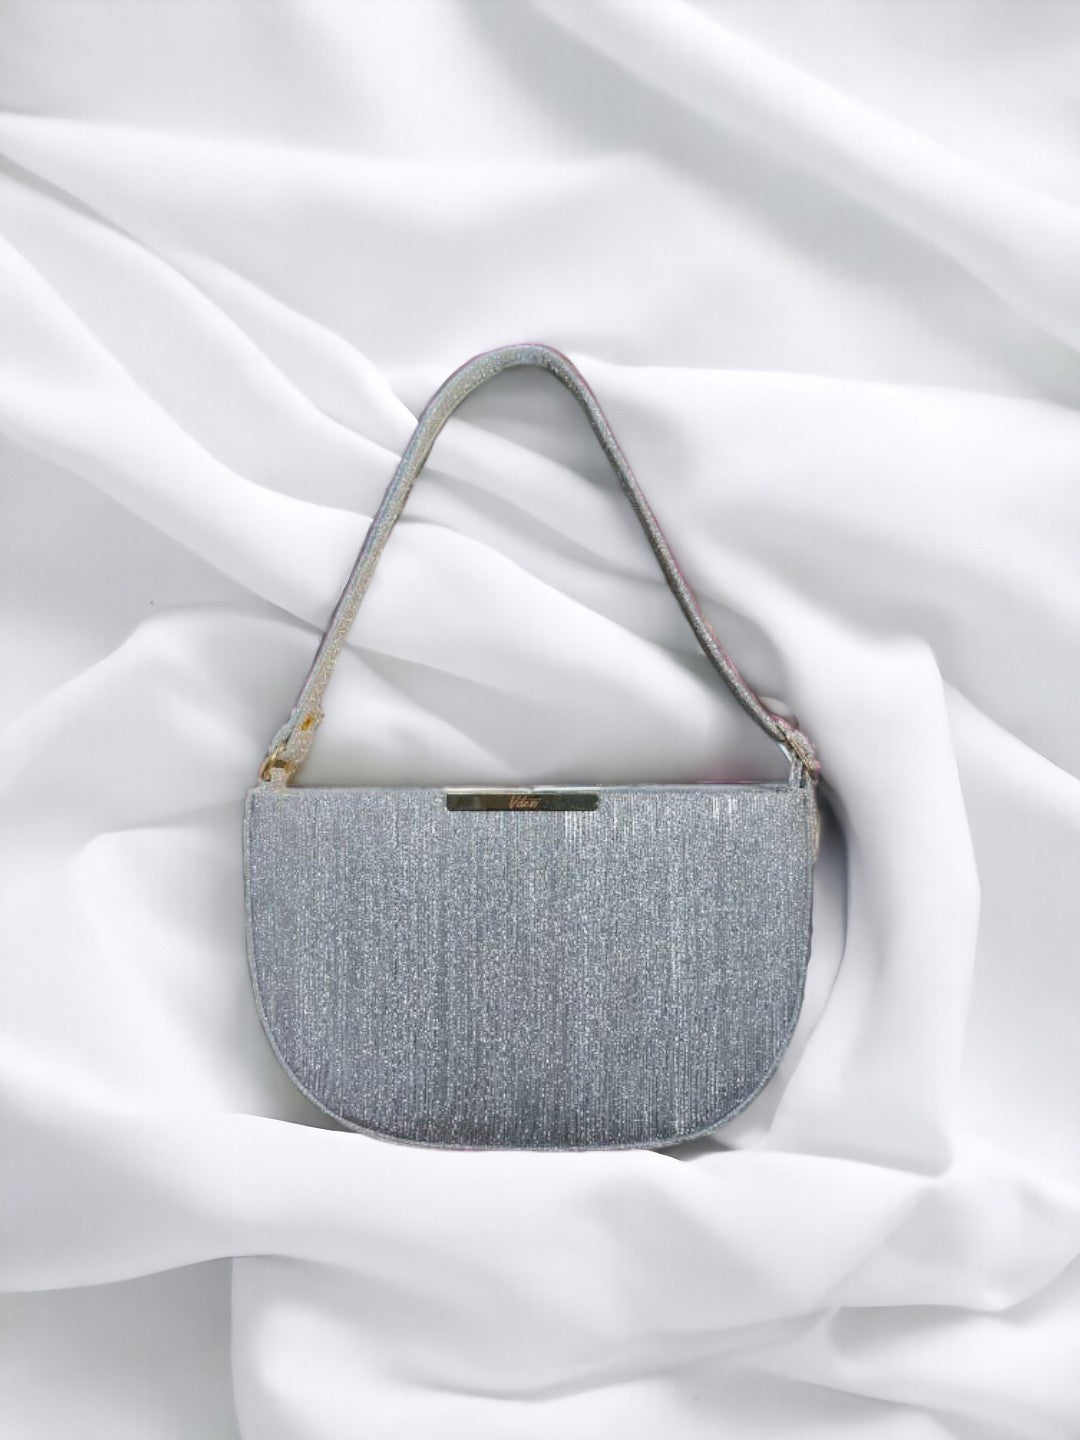 With its spacious interior and comfortable shoulder strap, it's perfect for everyday use and special occasions alike. Elevate your style with our chic shoulder bag today.